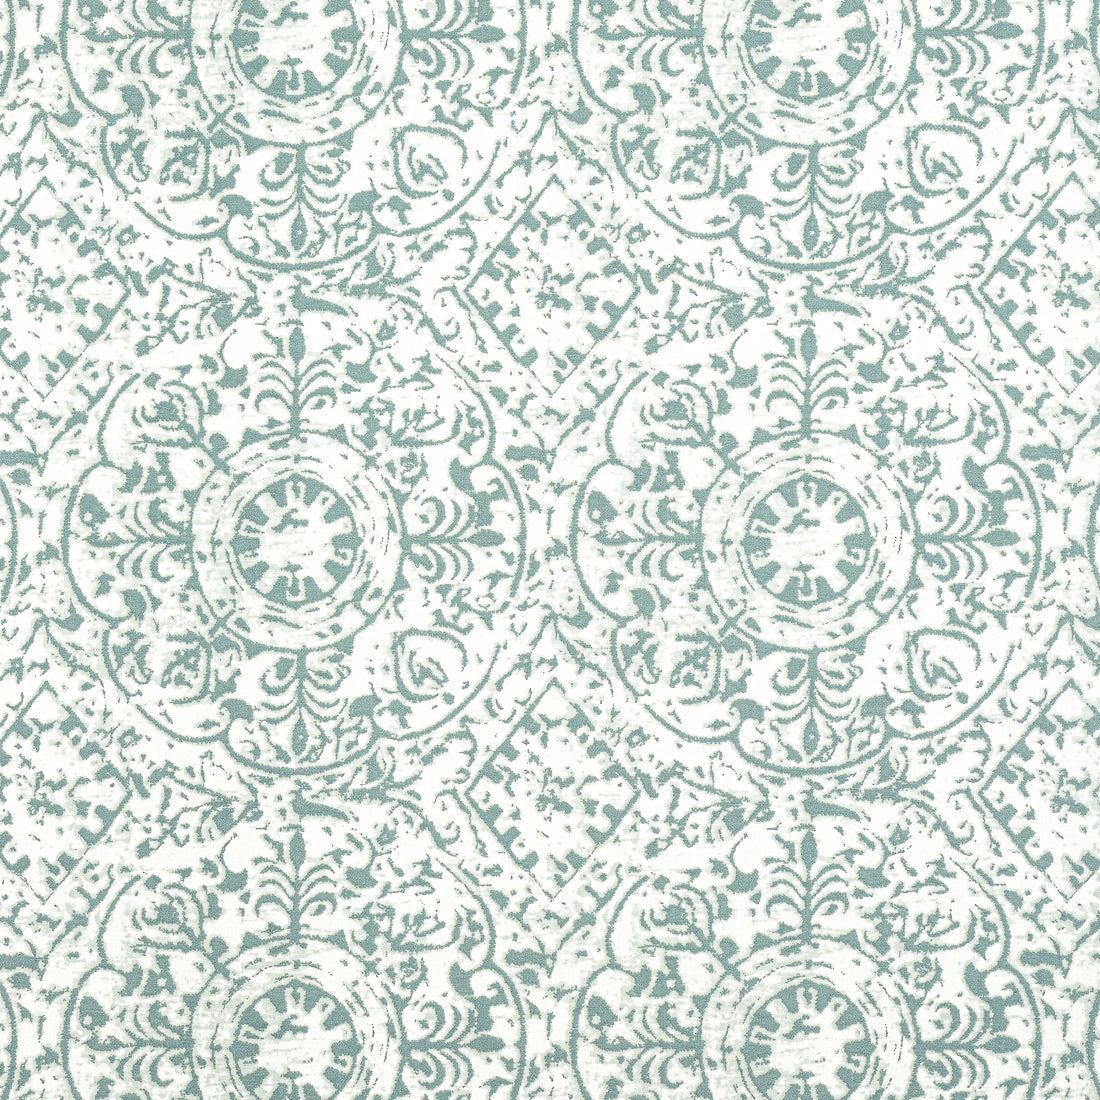 Havana fabric in seaglass color - pattern number F981310 - by Thibaut in the Montecito collection